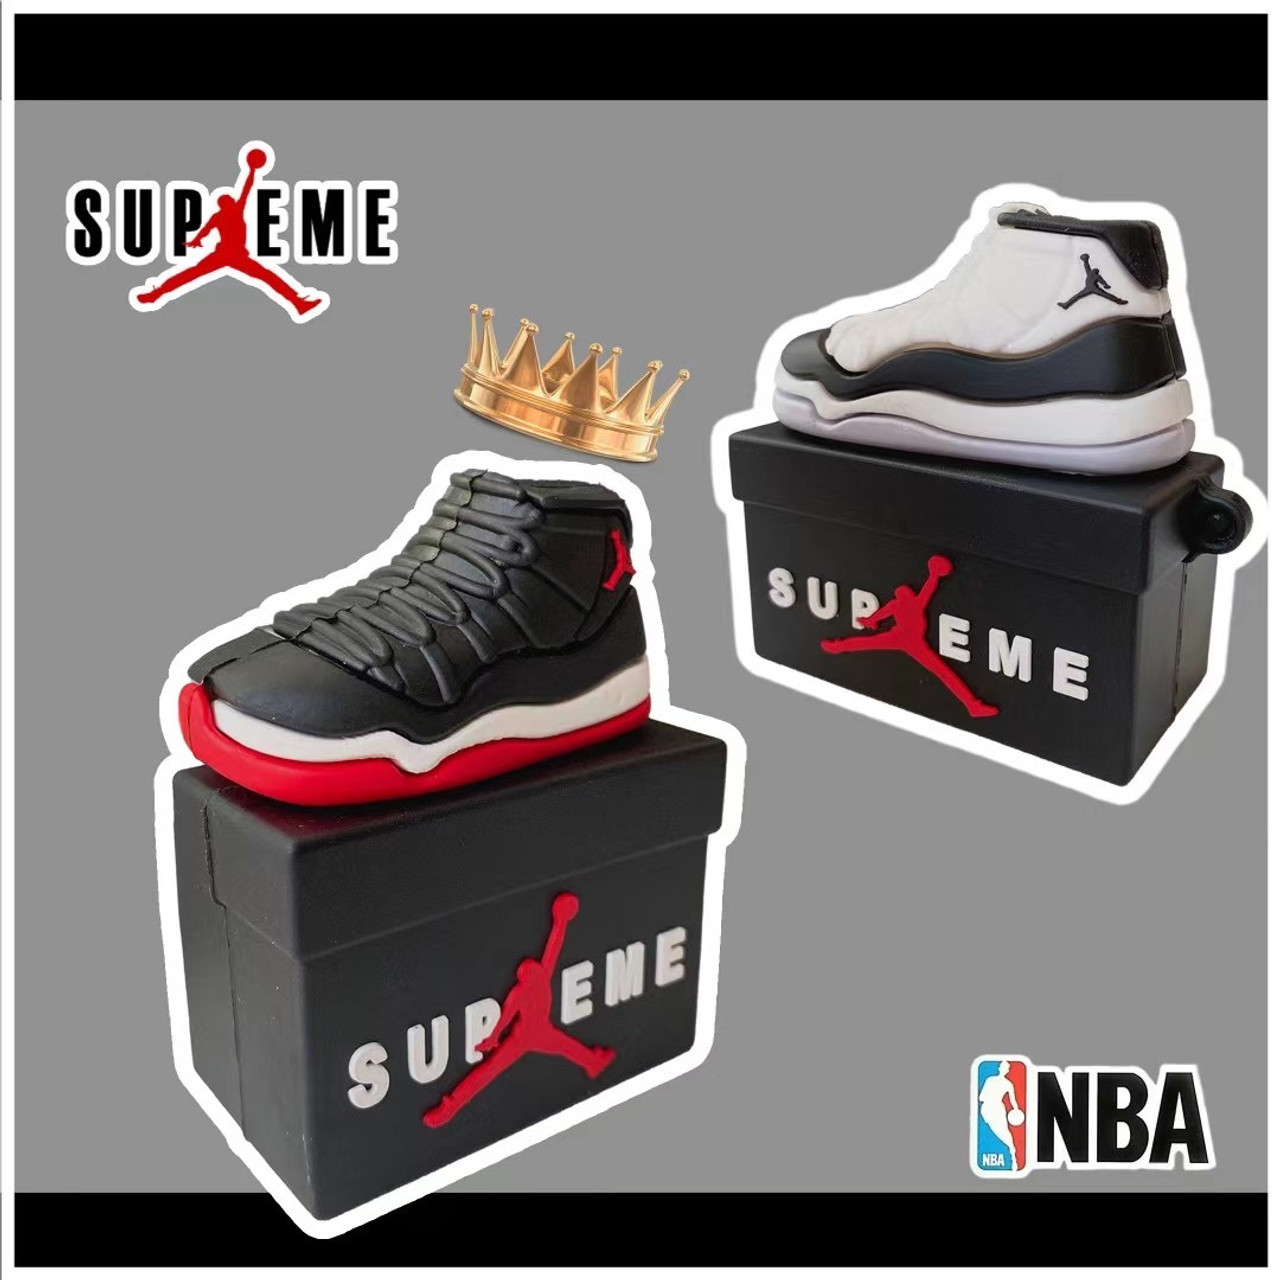 Air Jordan Supreme Sneakers Protection Cover Case For Apple